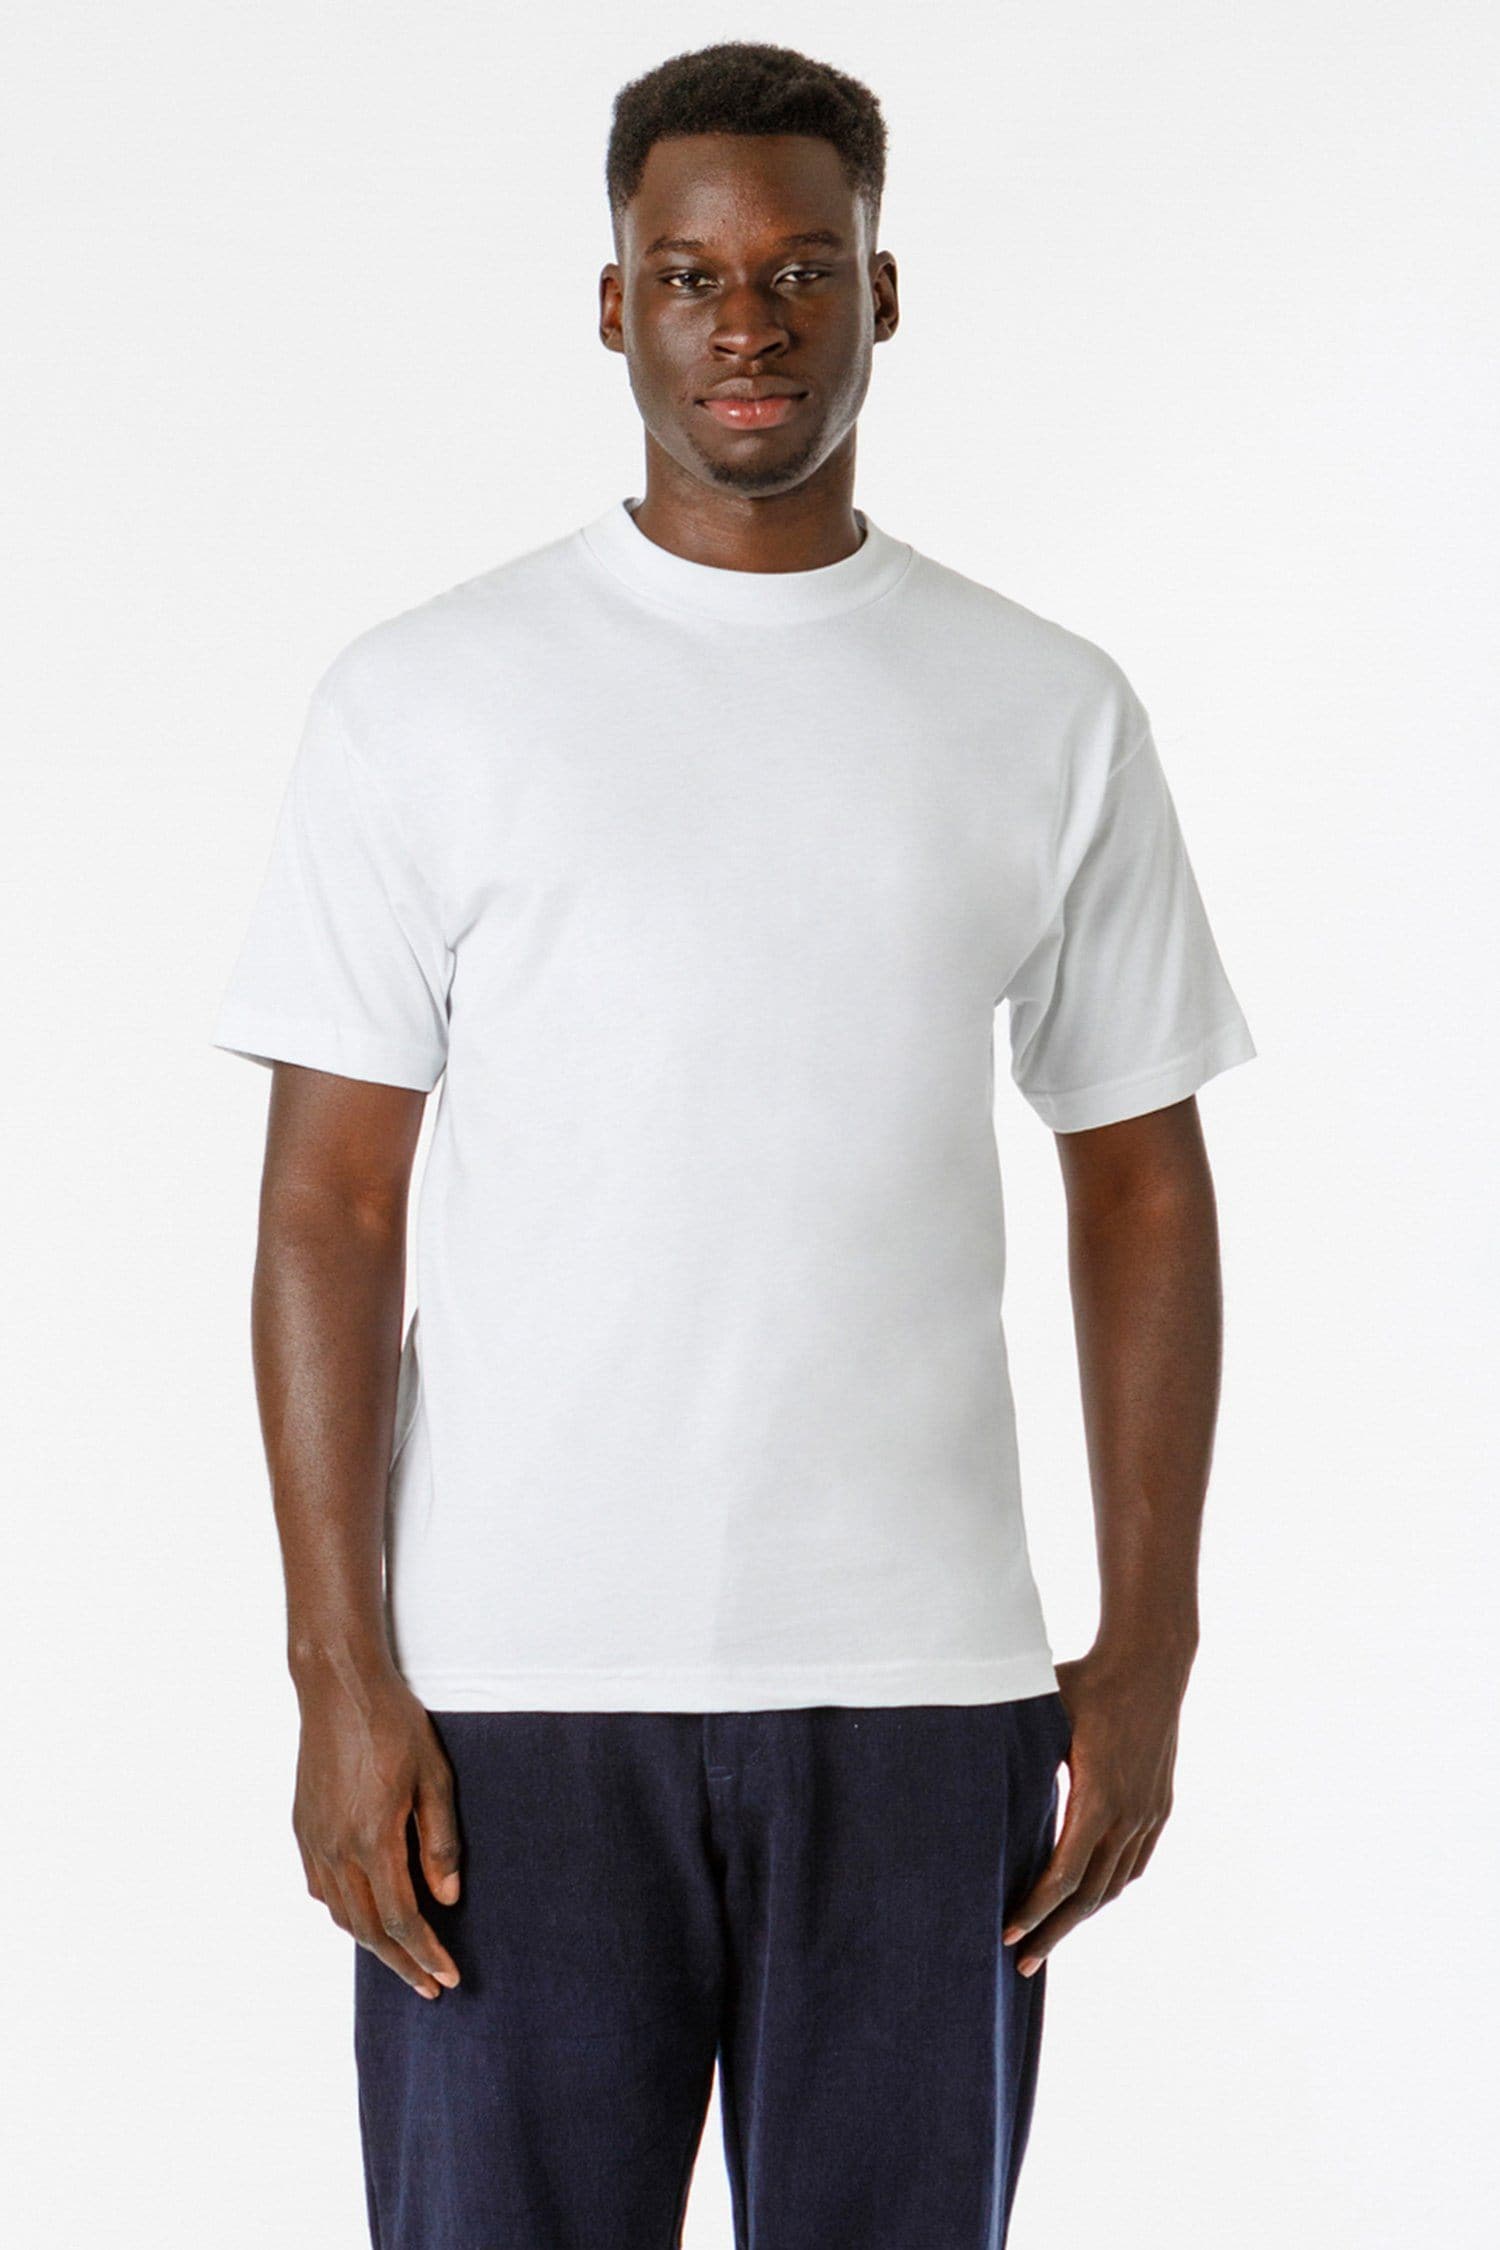 Los Angeles Apparel best blank t shirt for your Clothing Brand